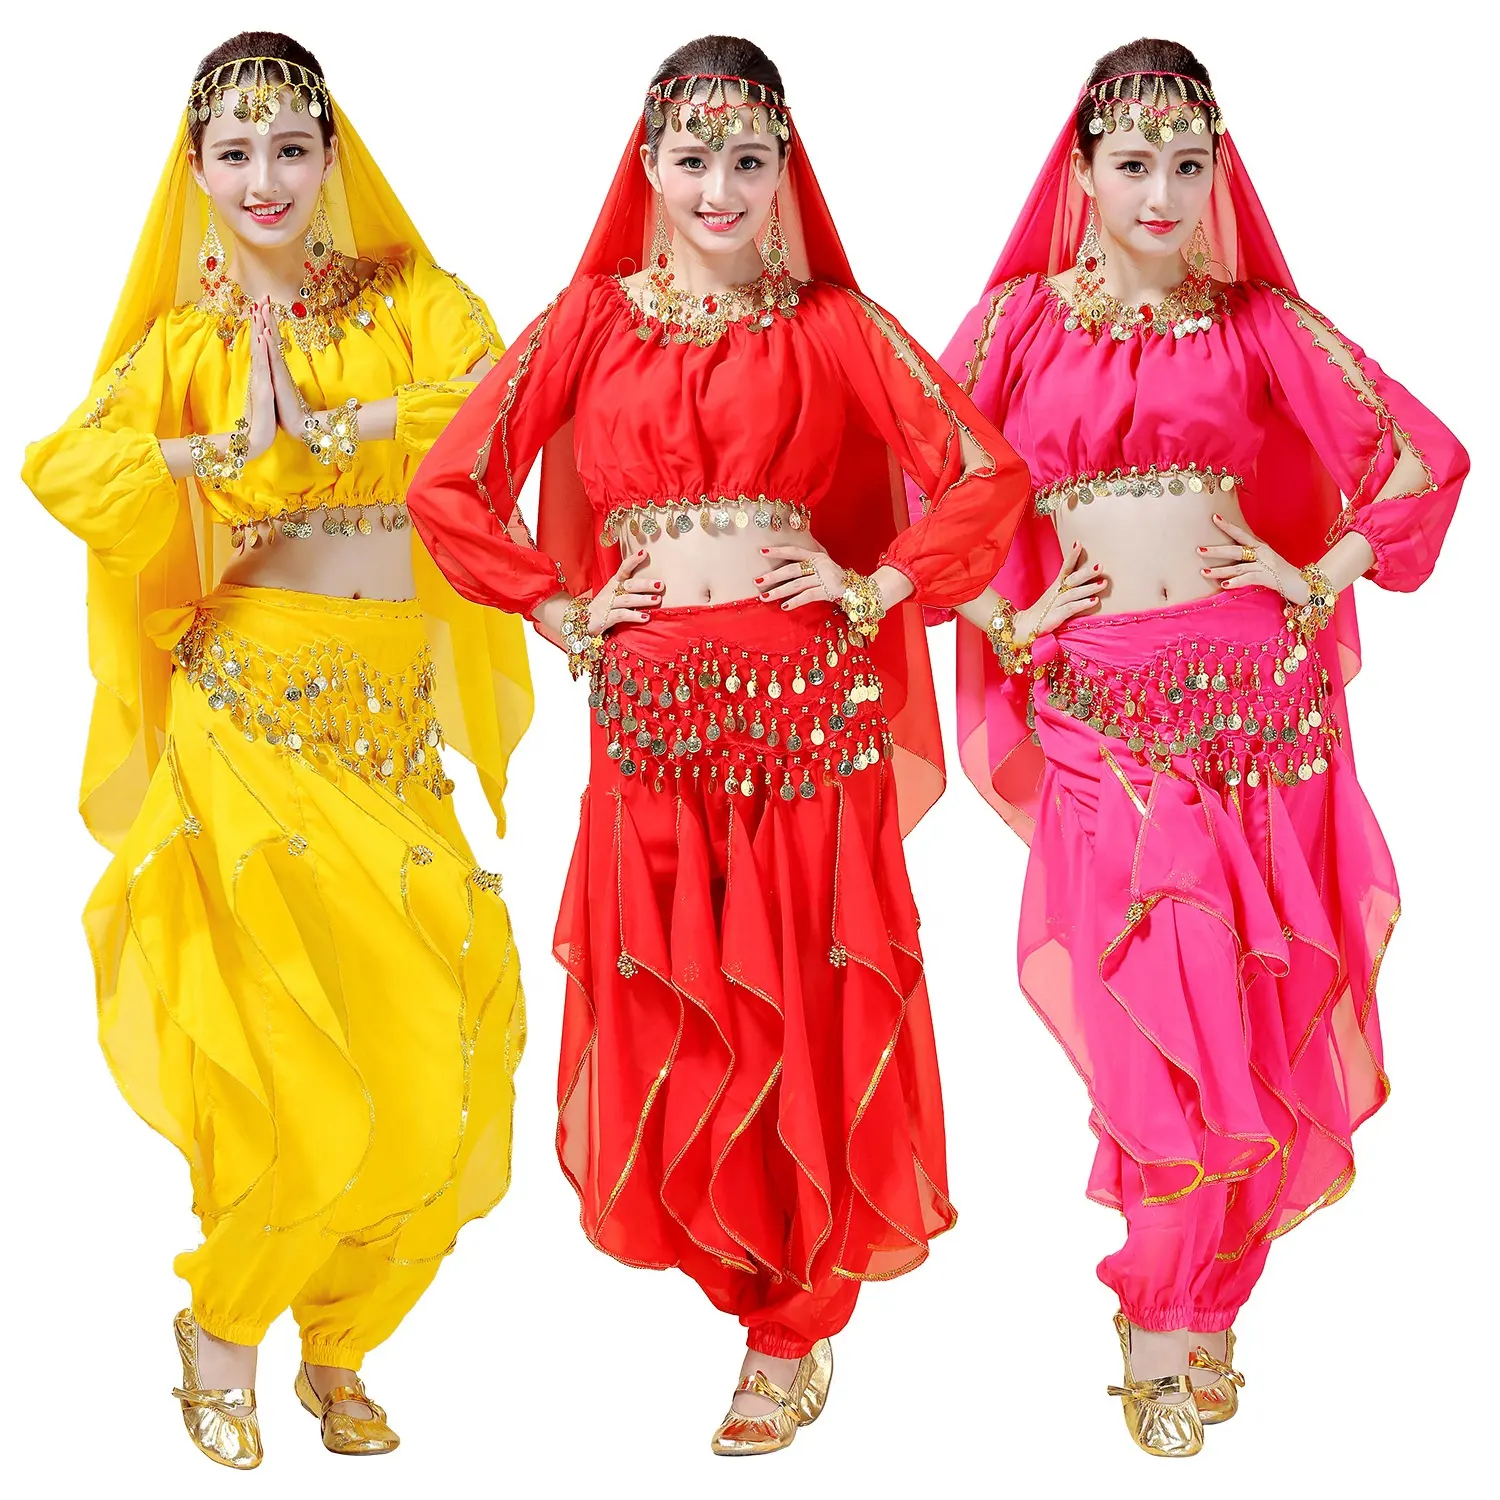 Women's Halloween Costume Tops Skirt Set with Accessories Belly Dance Performance Outfit 6 Colors